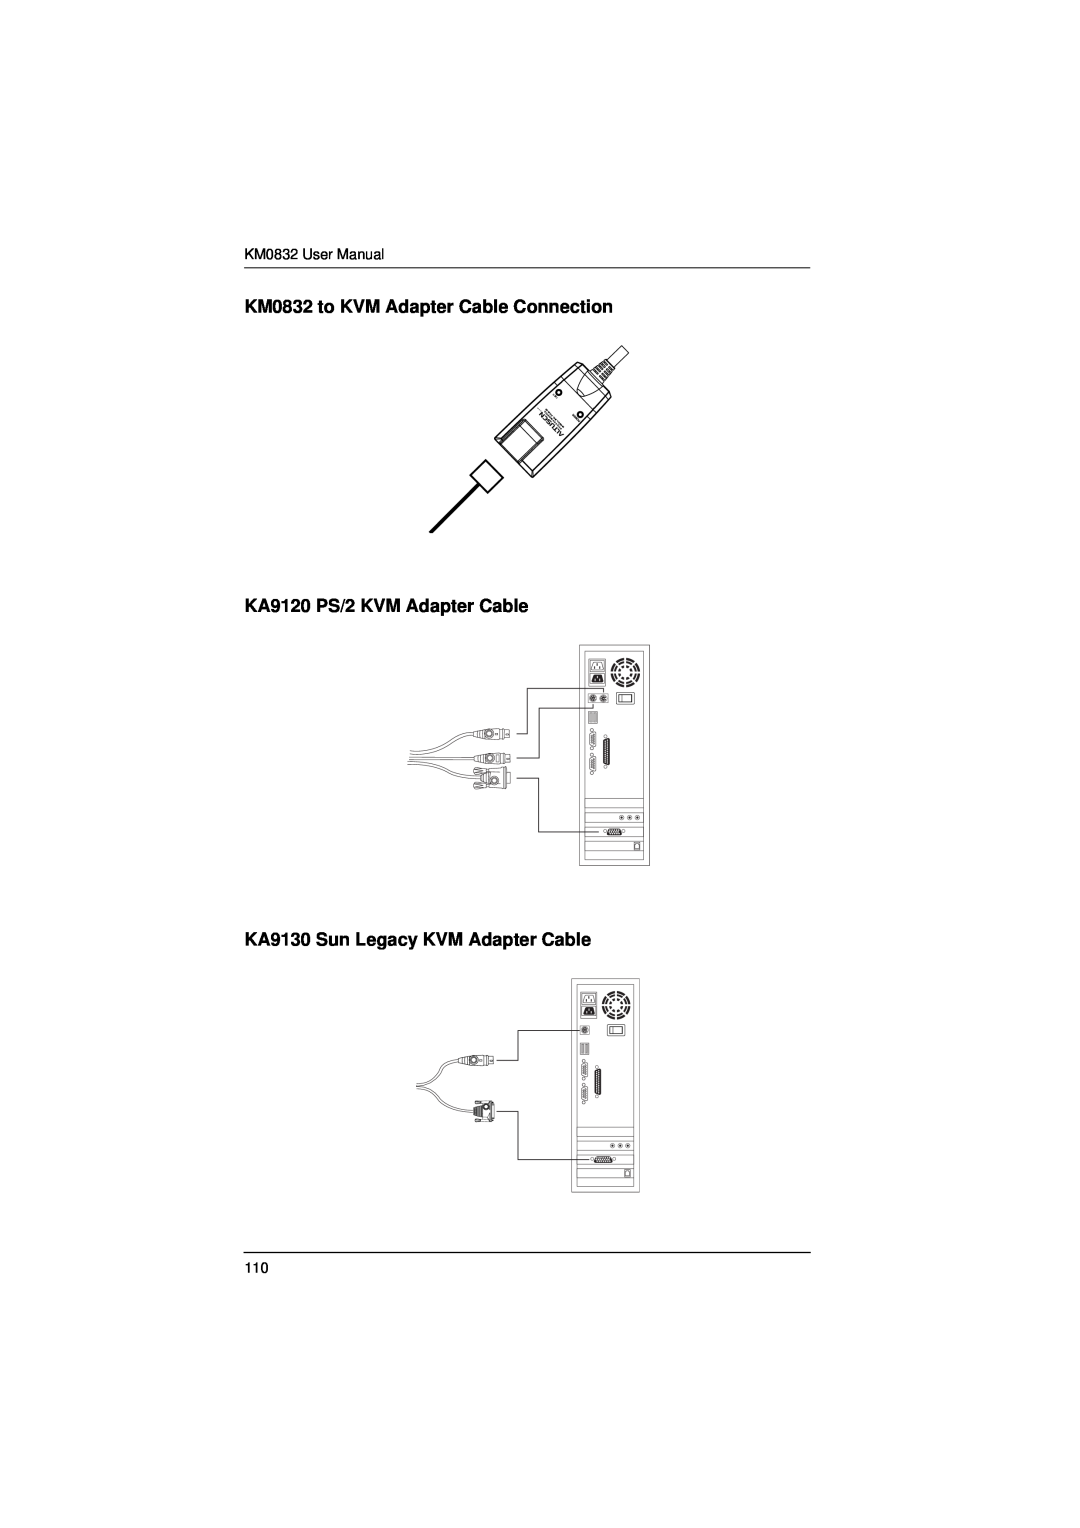 ATEN Technology user manual KM0832 to KVM Adapter Cable Connection, K LIN EKA9120 MODUL.NO CPUMODEL PS/2, ATEN y b 